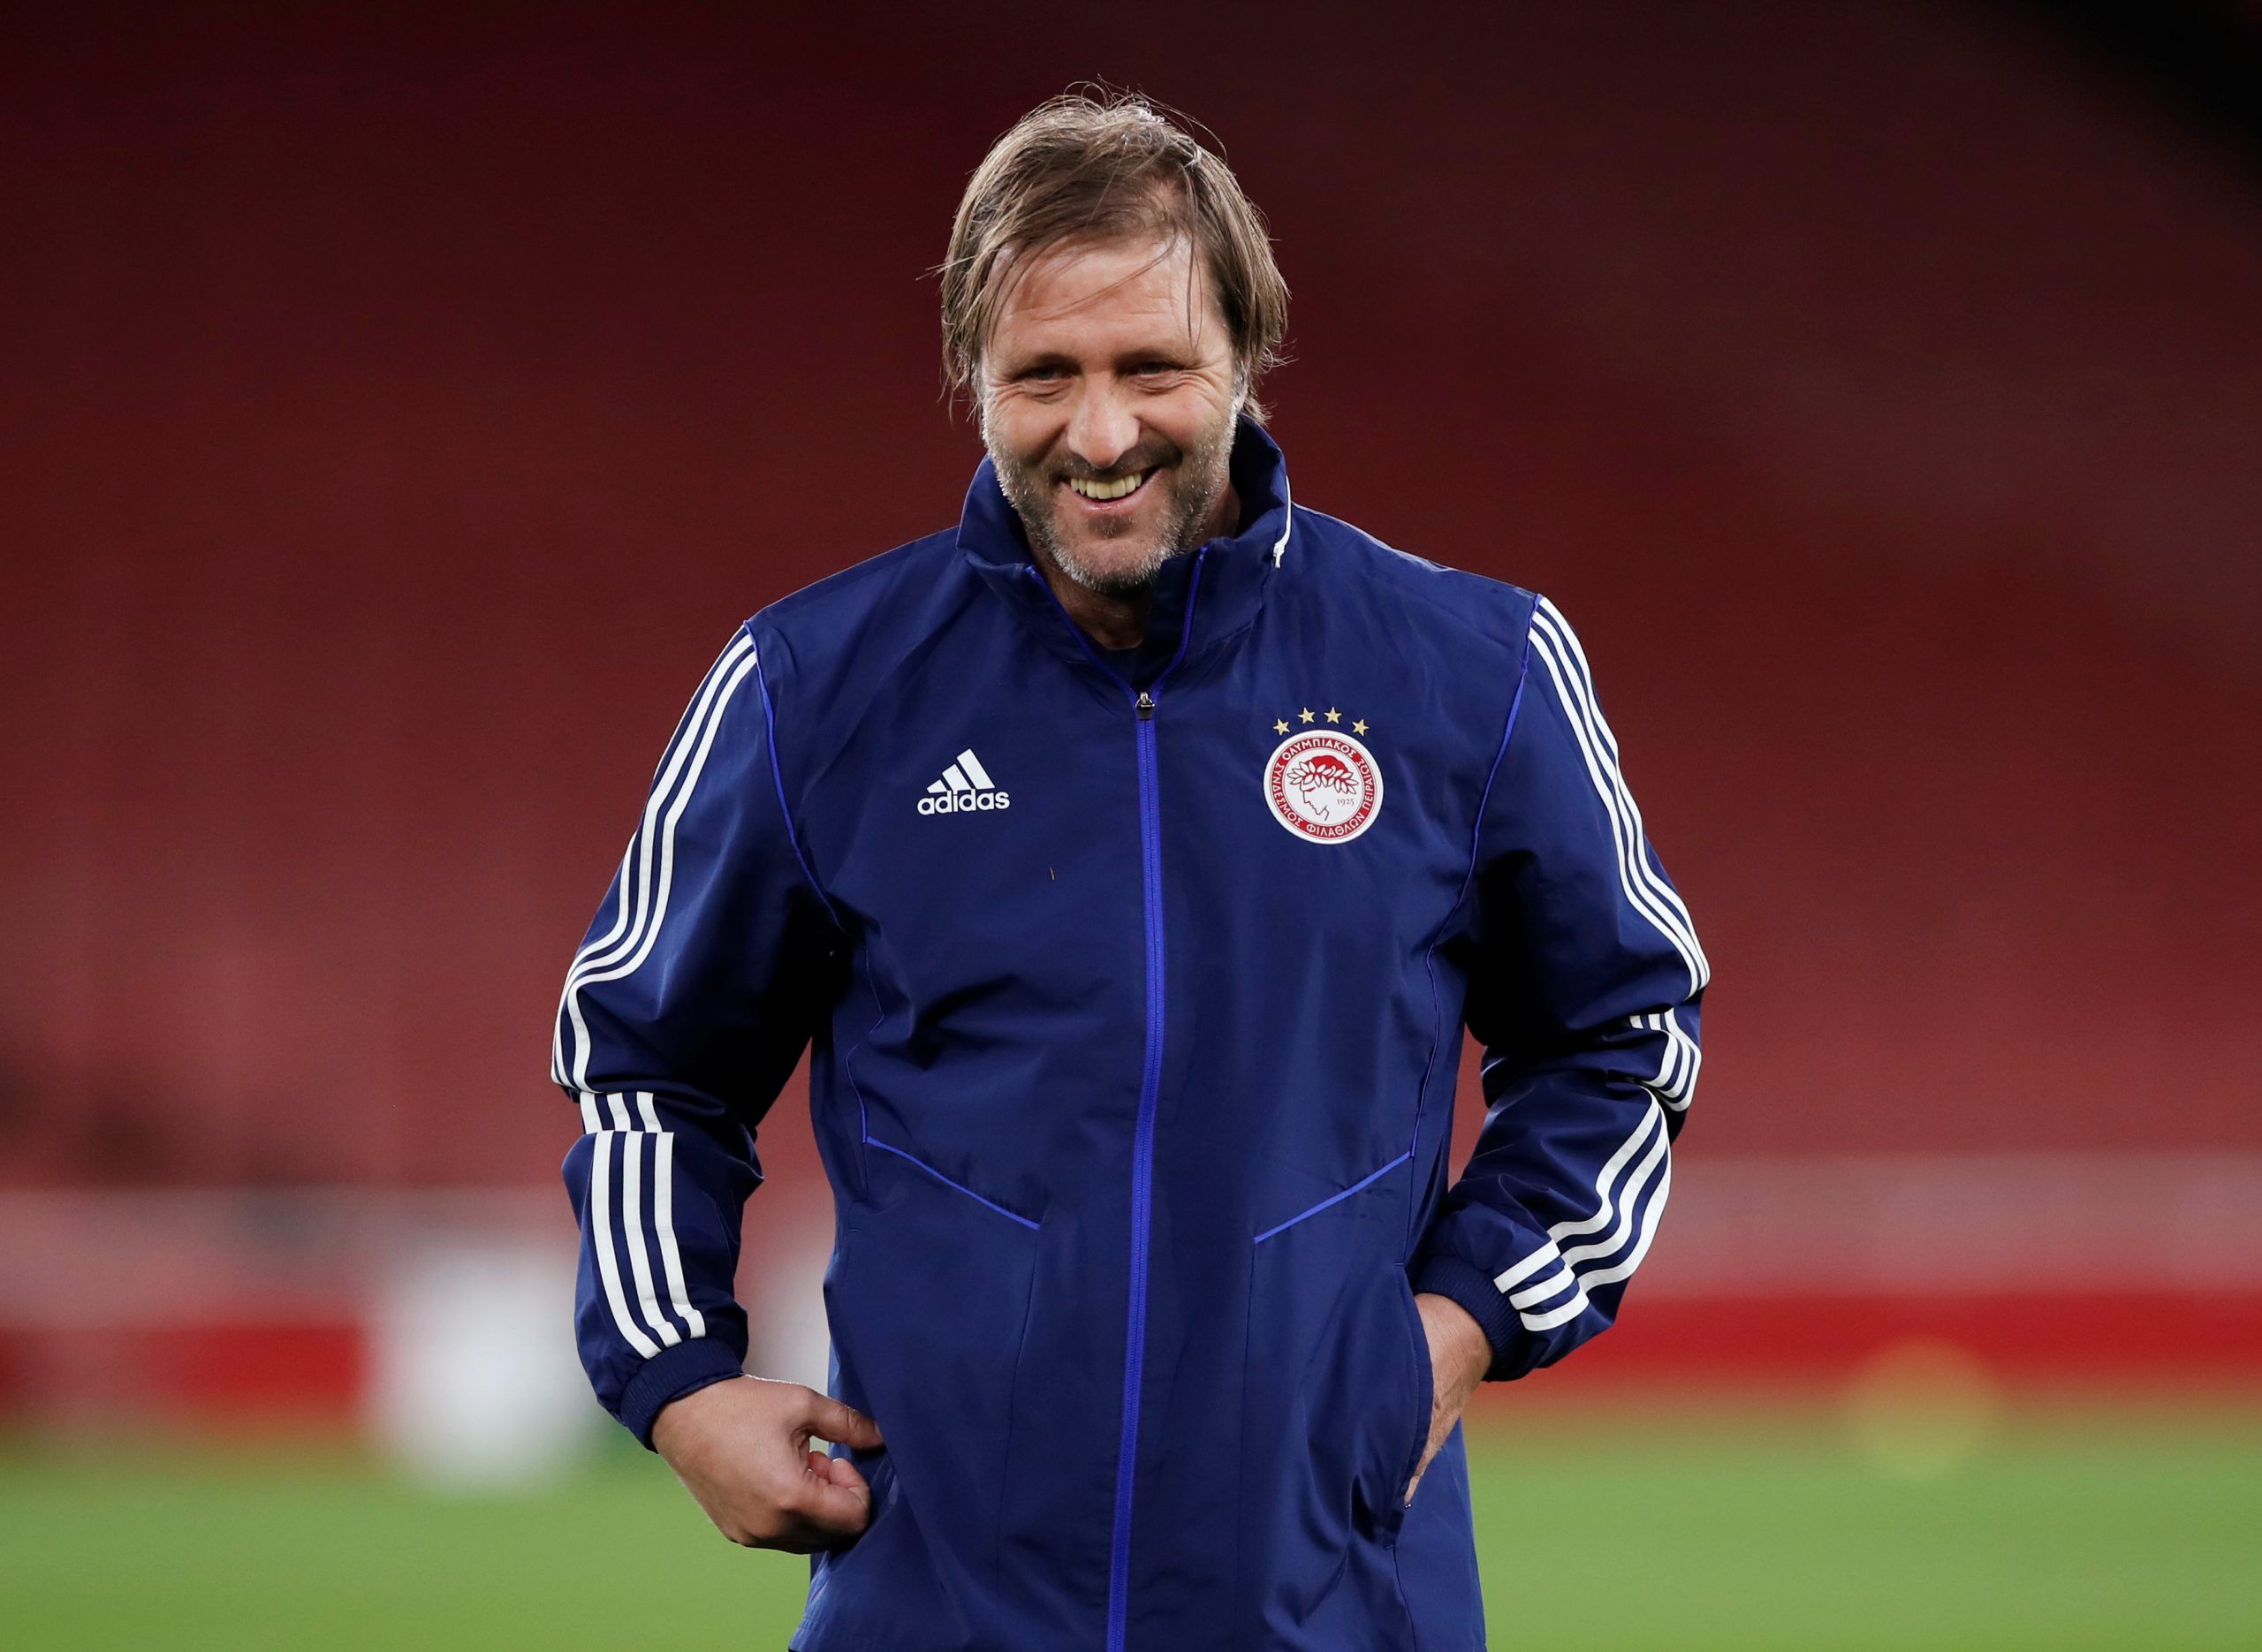 Soccer Football - Europa League - Olympiacos Training - Emirates Stadium London, Britain - February 26, 2020   Olympiacos coach Pedro Martins during training   Action Images via Reuters/Paul Childs